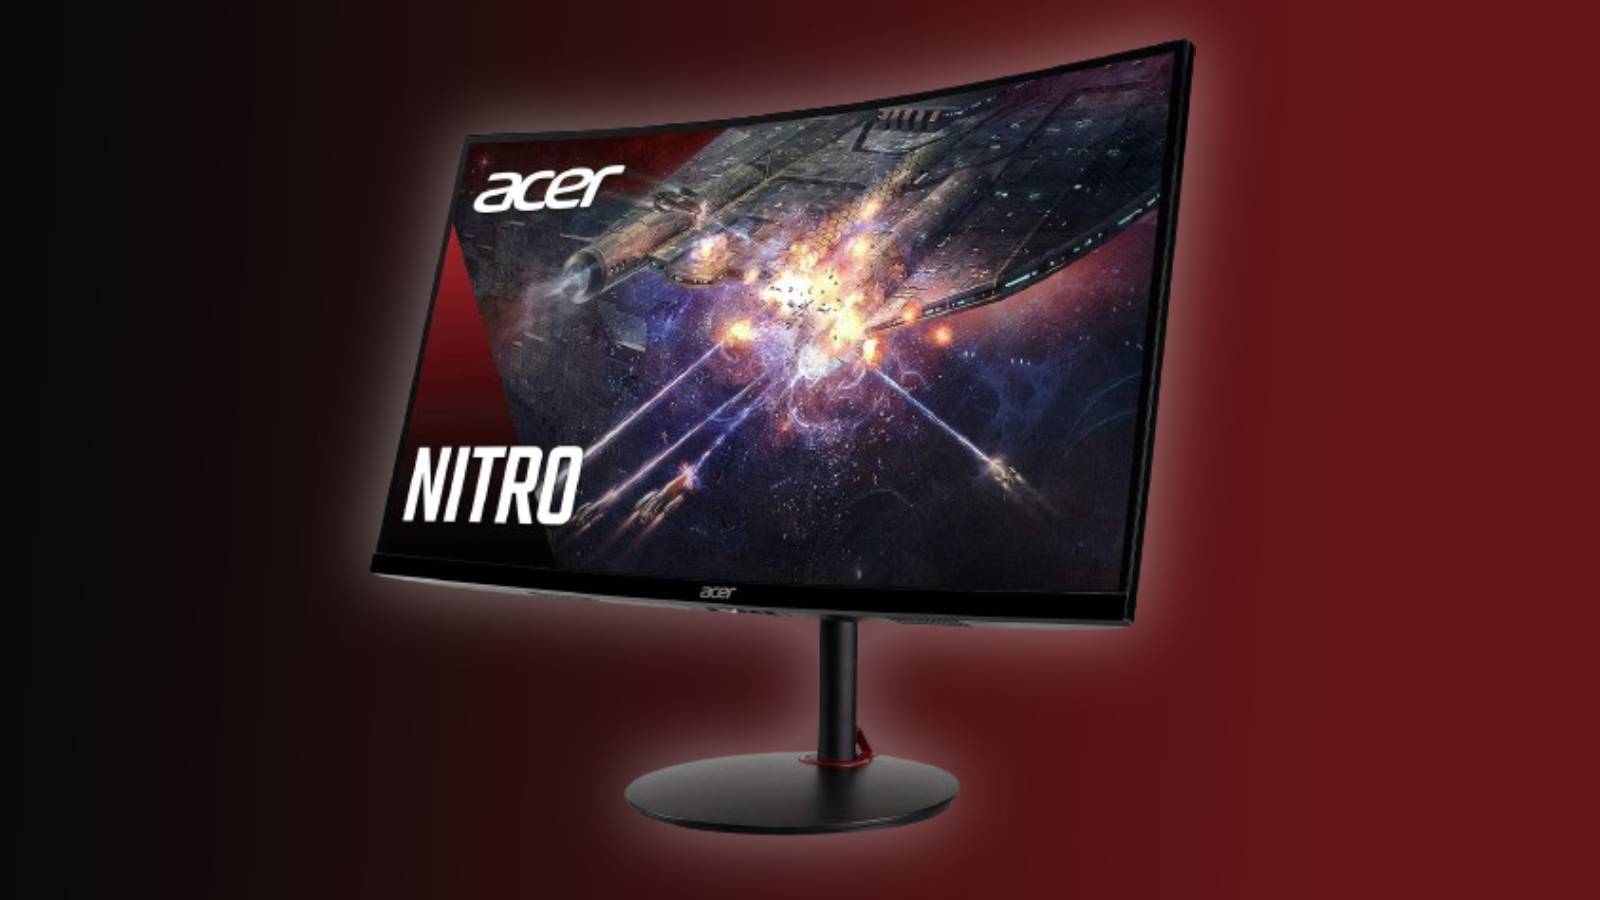 Image of the Acer Nitro XZ270 gaming monitor, with a red and black background.